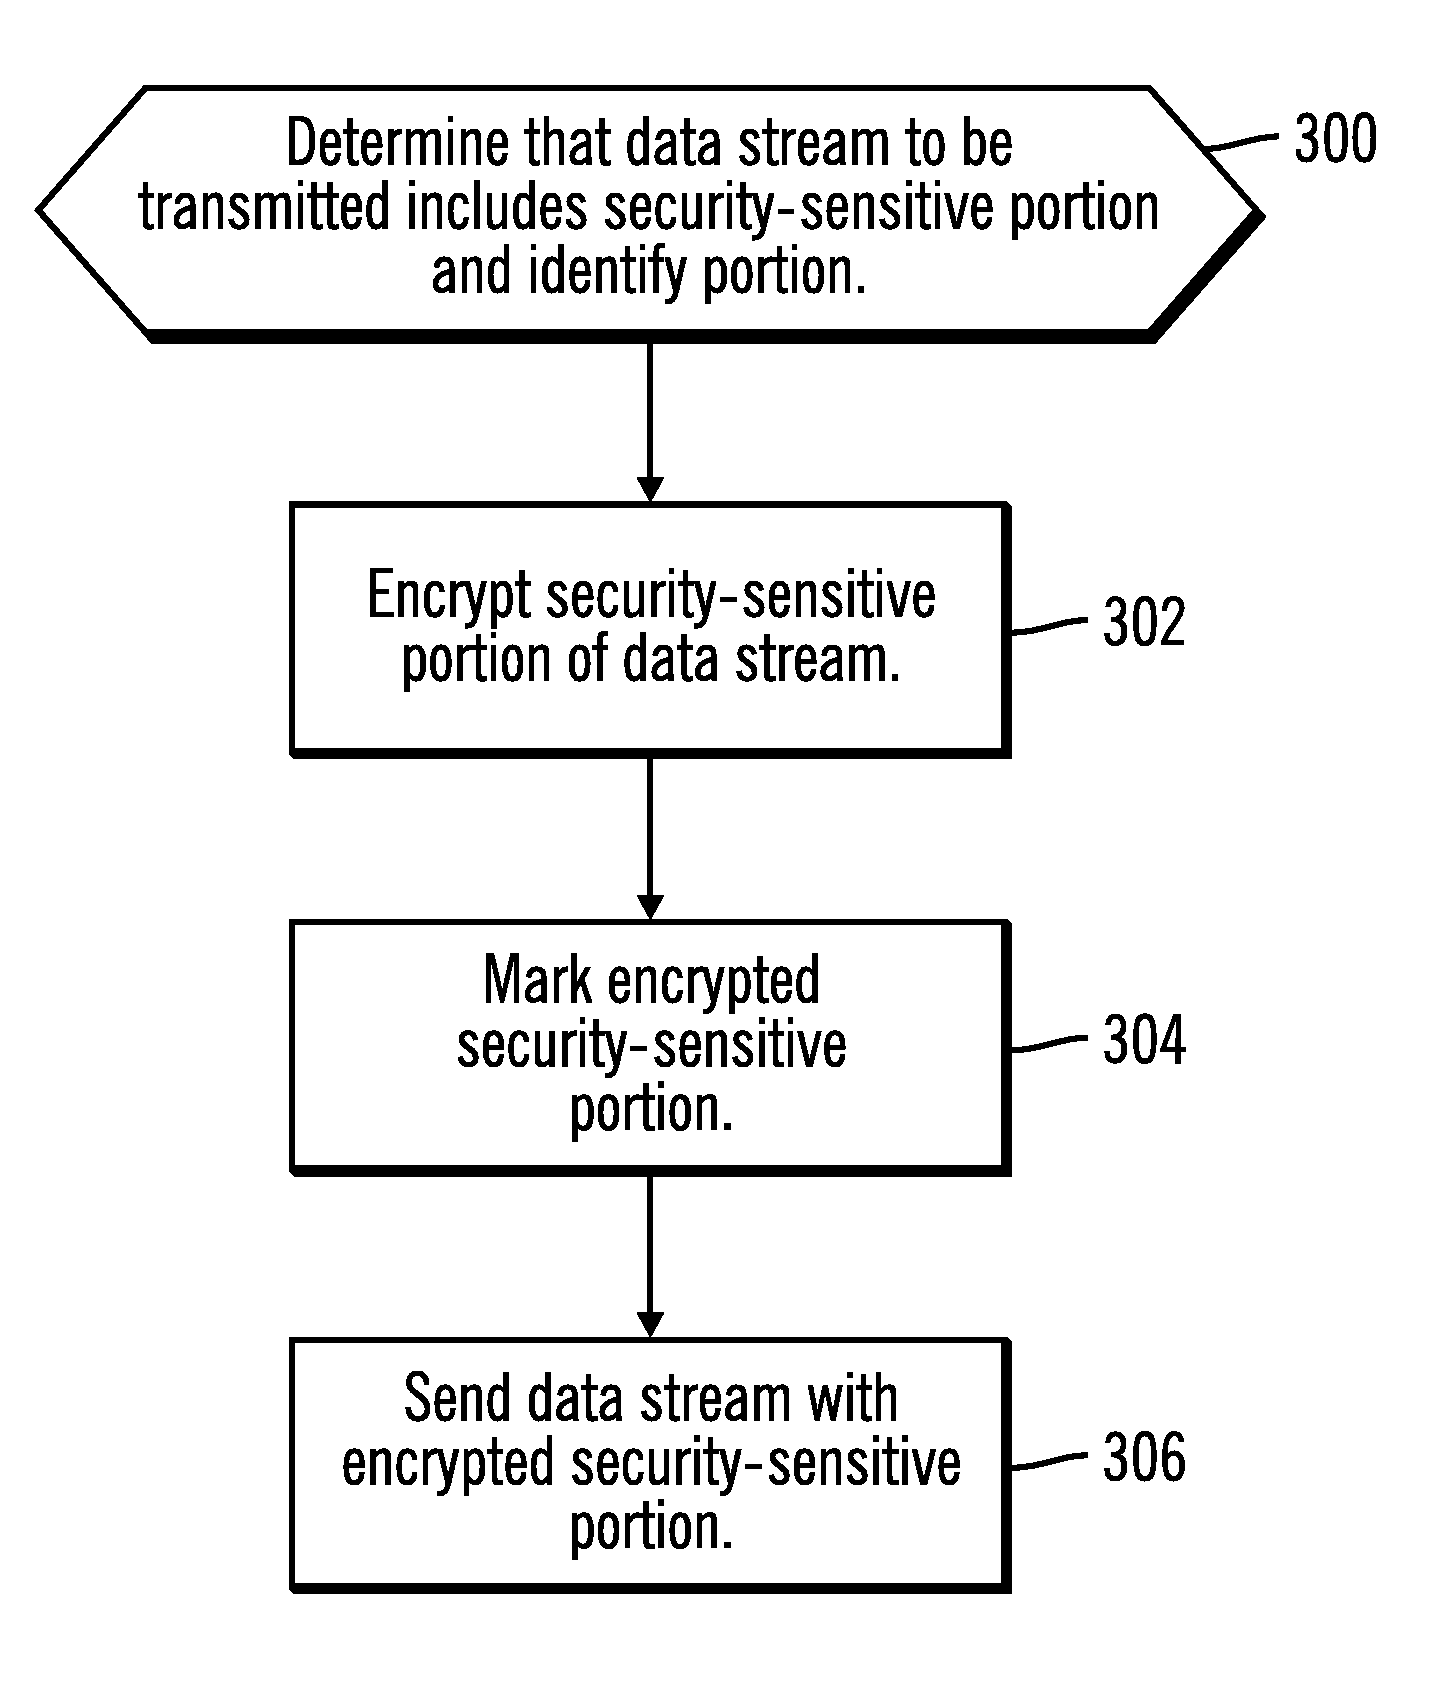 Encryption of security-sensitive data by re-using a connection